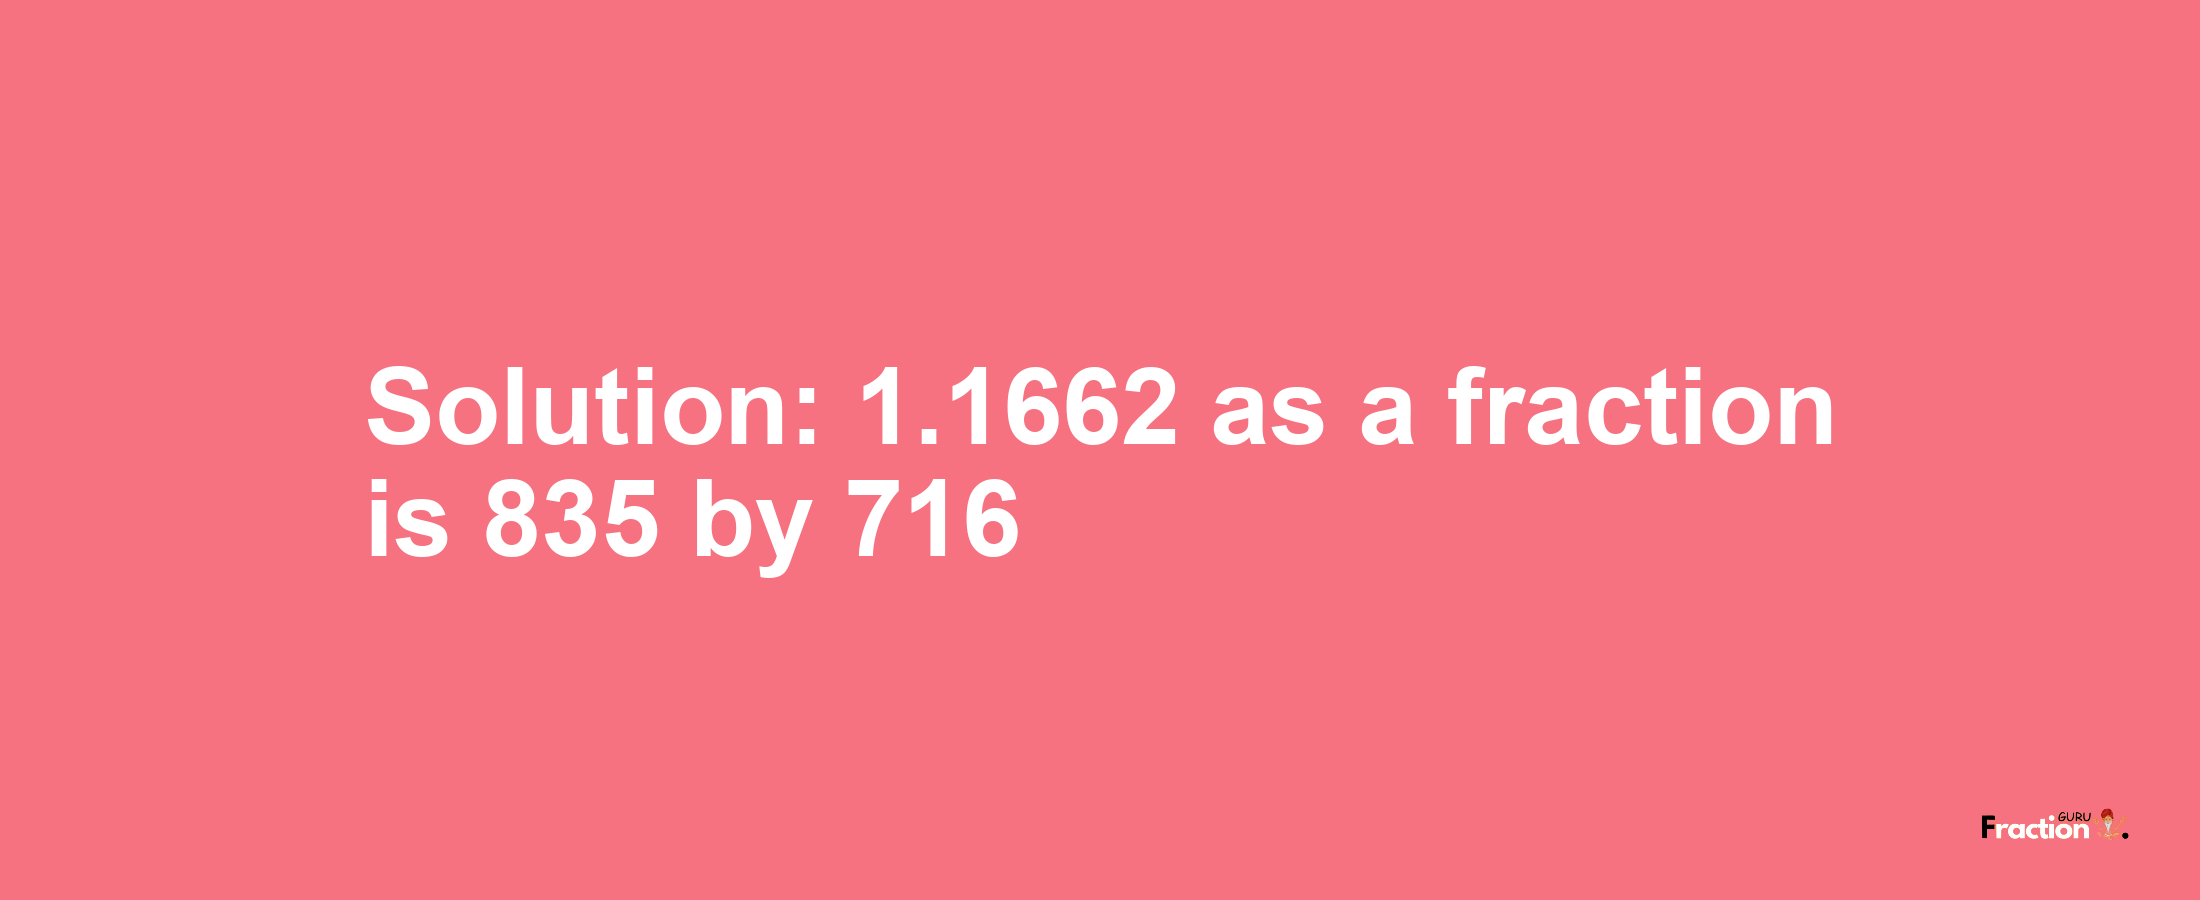 Solution:1.1662 as a fraction is 835/716